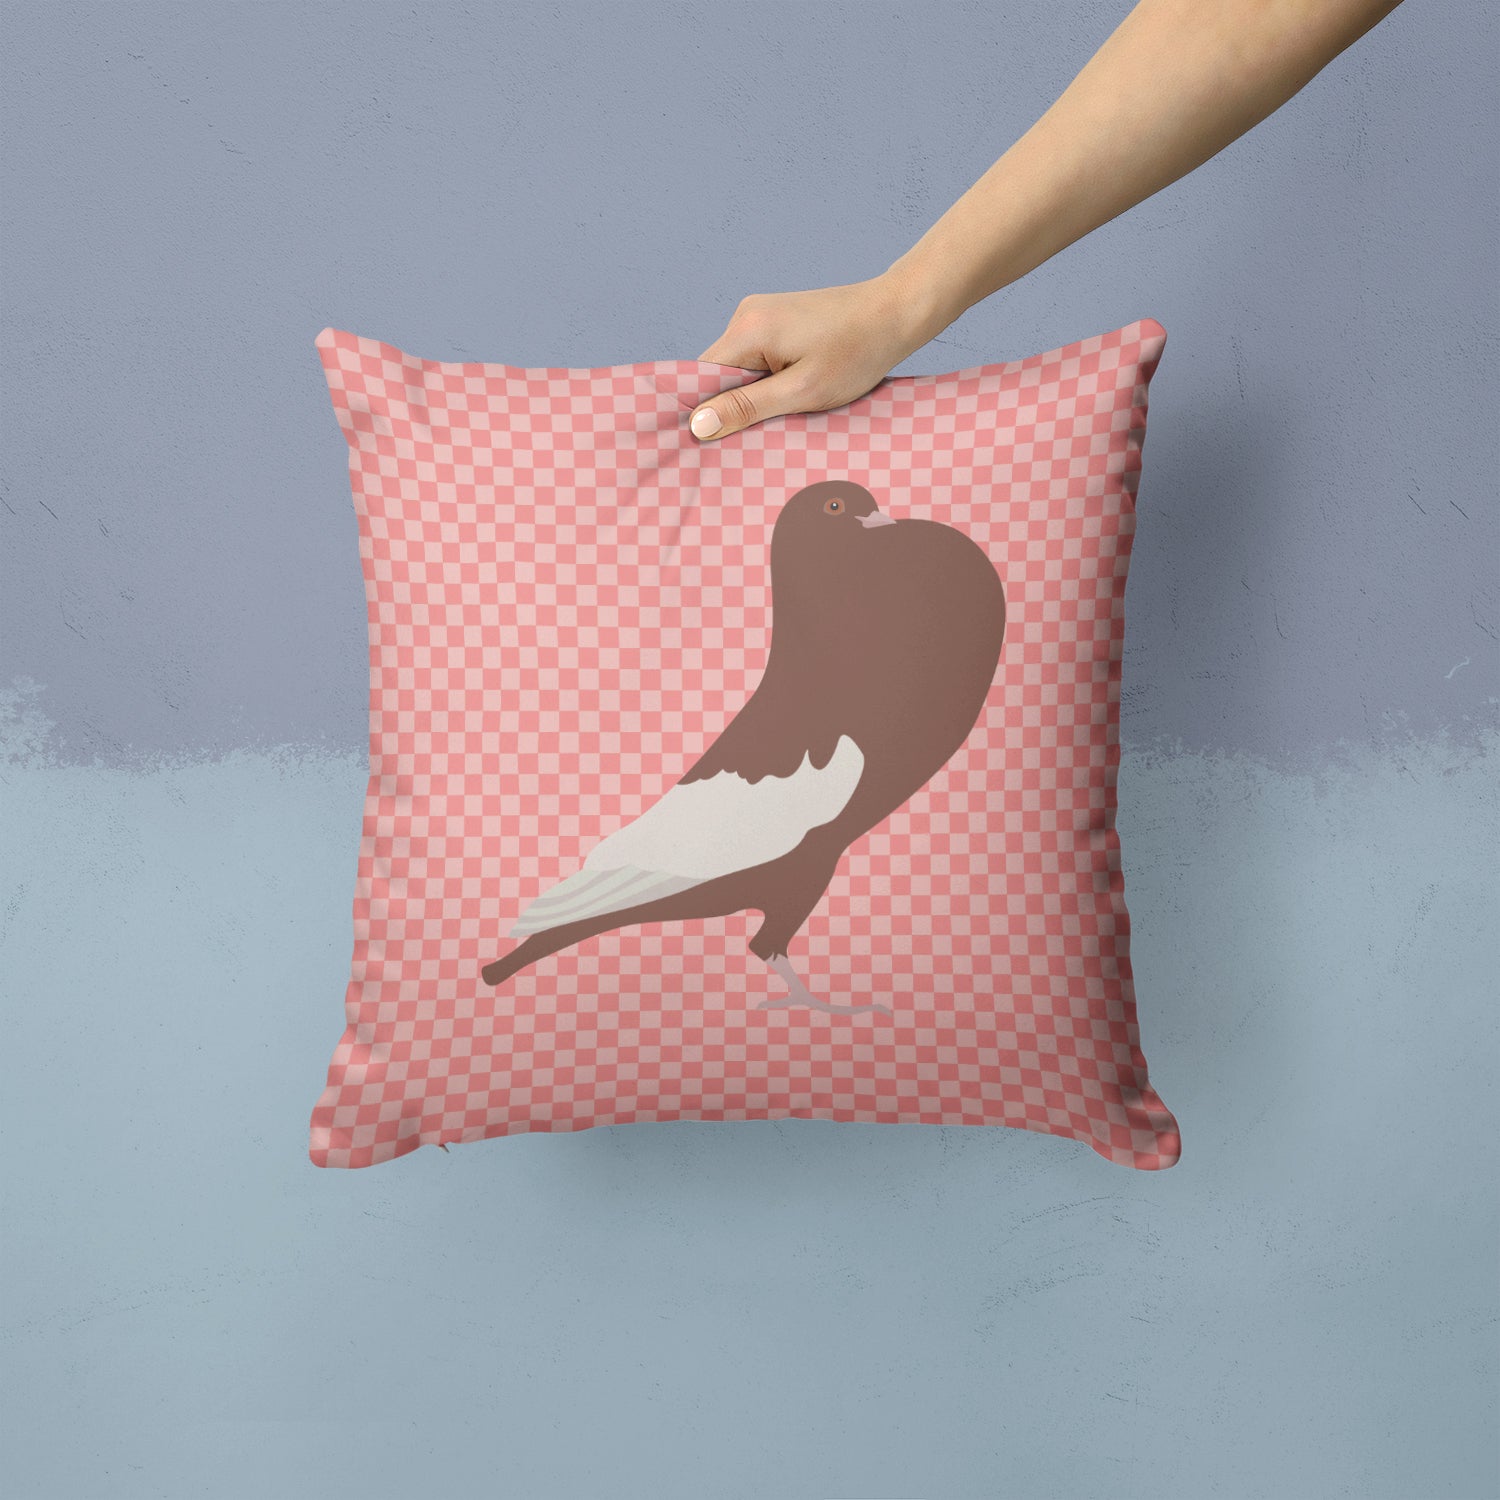 English Pouter Pigeon Pink Check Fabric Decorative Pillow BB7954PW1414 - the-store.com